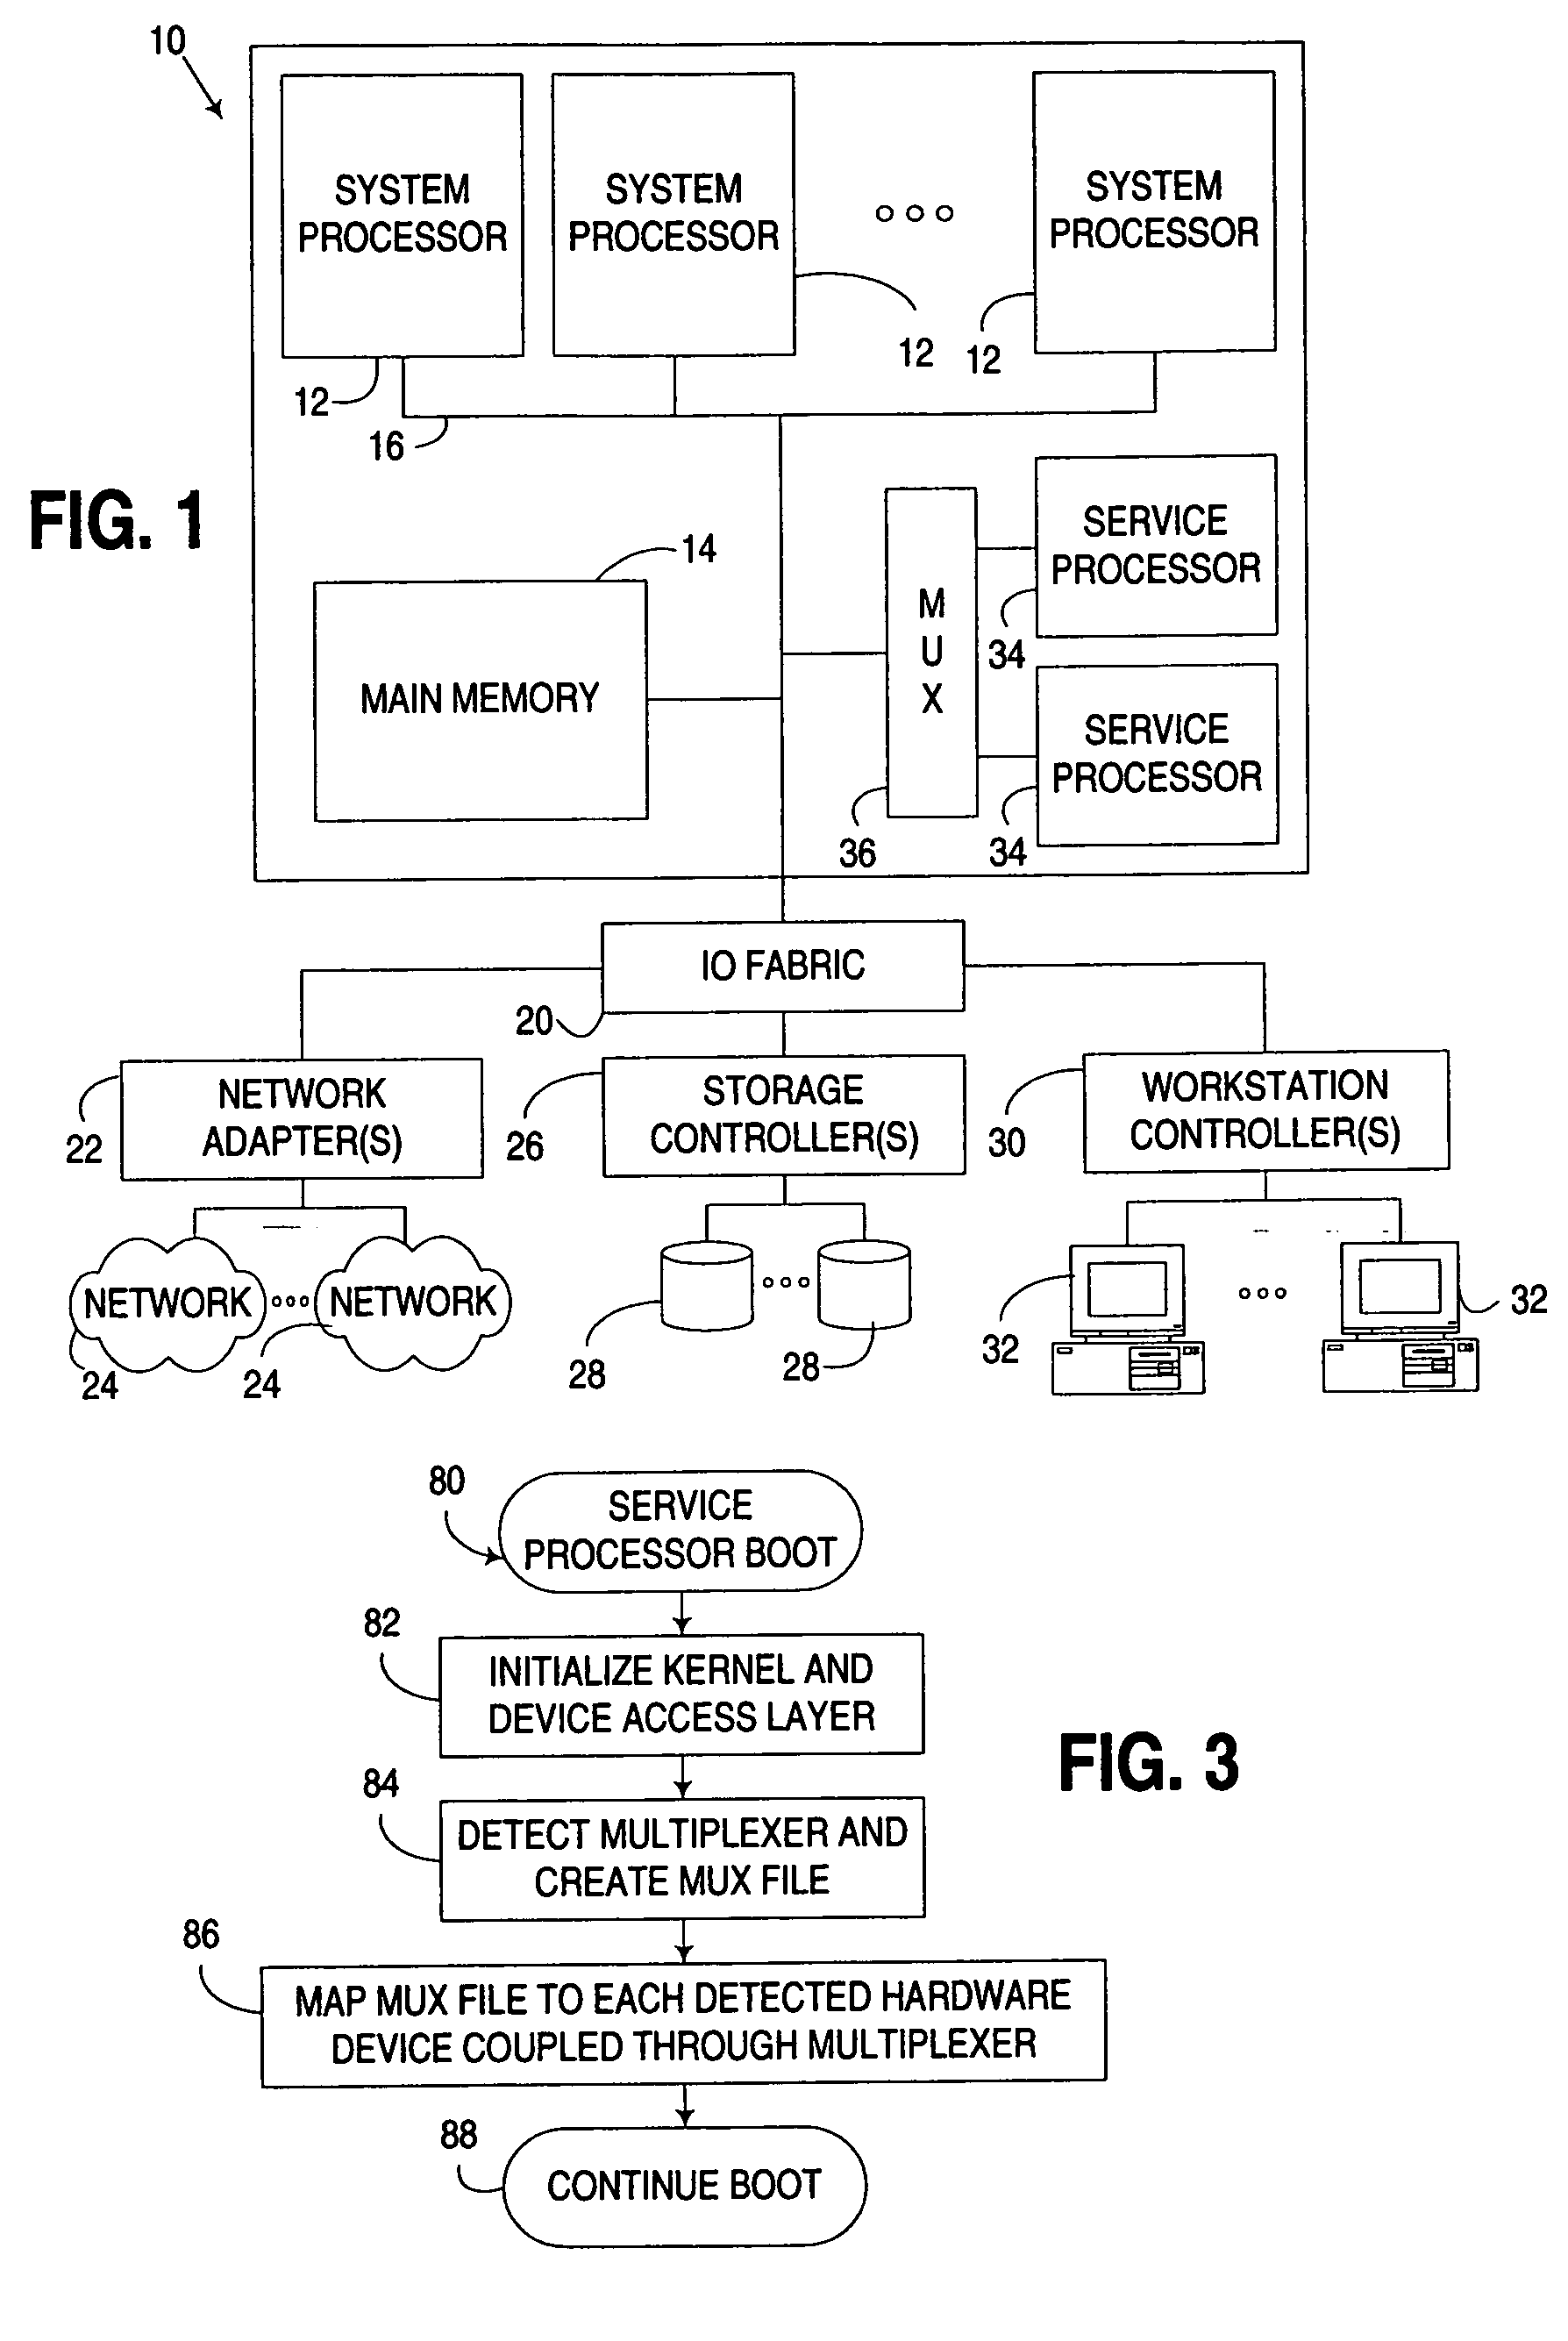 File-based access control for shared hardware devices